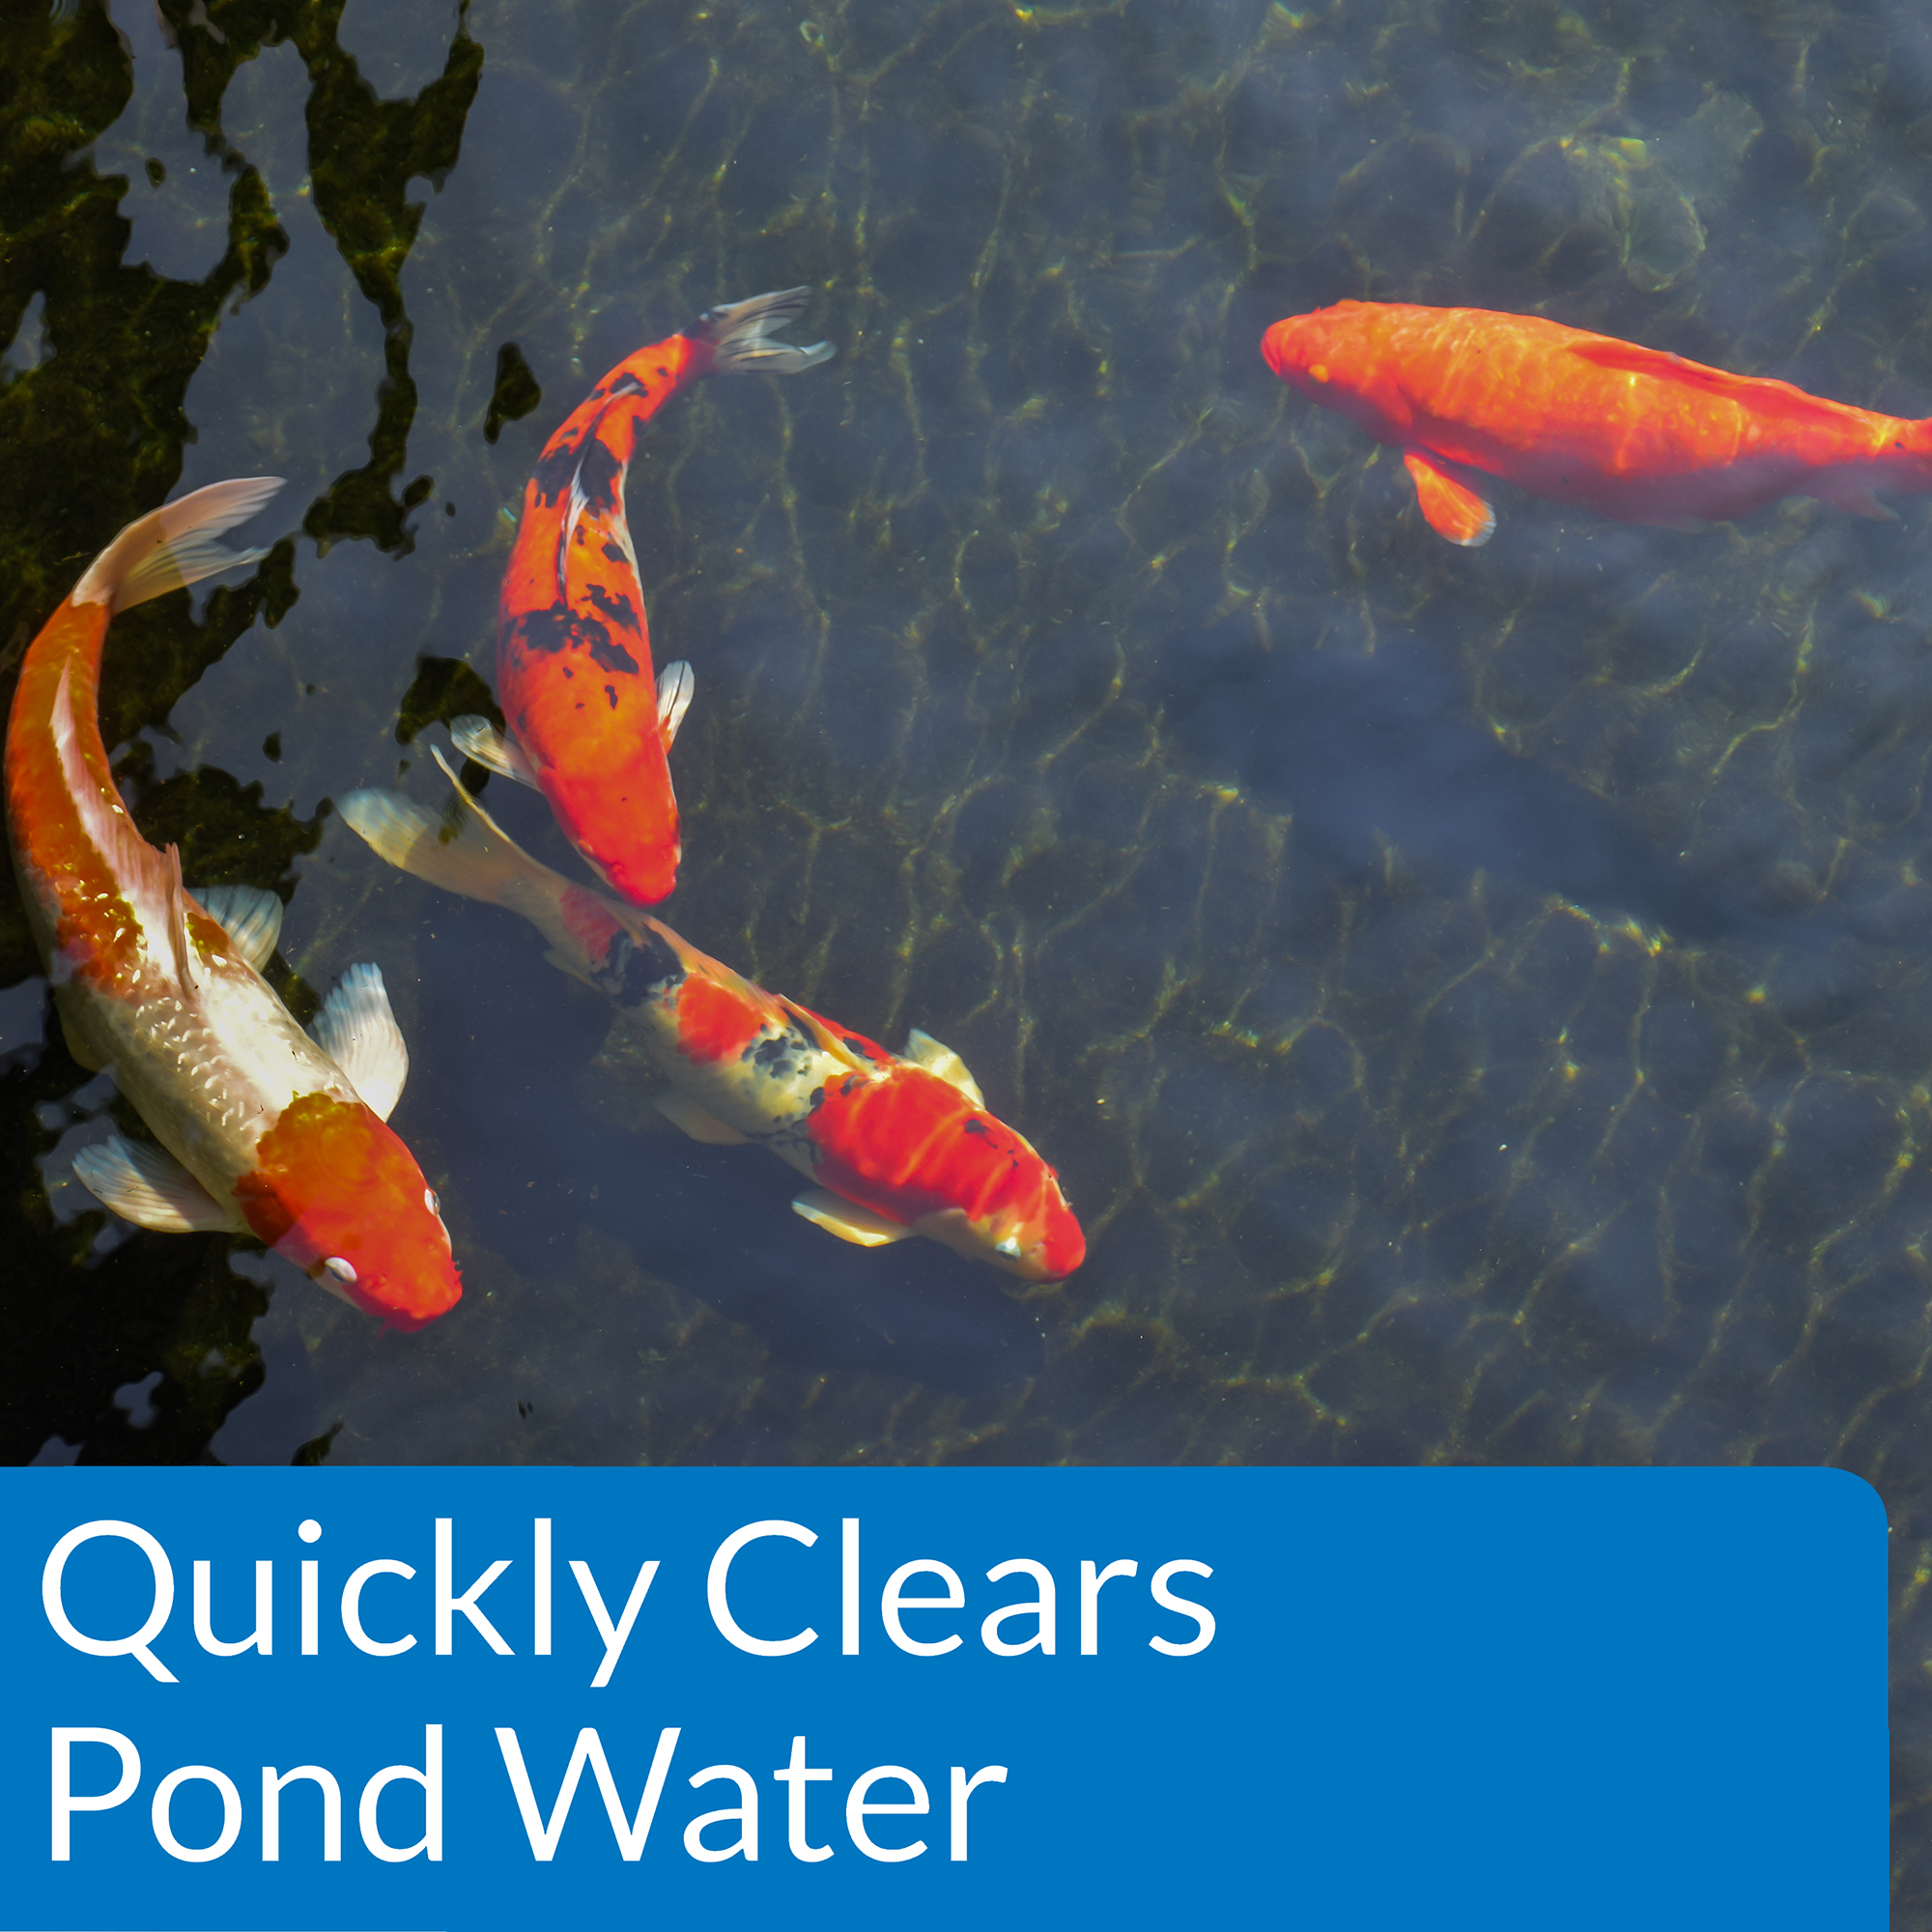 API Pond Accu-Clear, Pond Water Clarifier, 16-Ounce - image 4 of 7